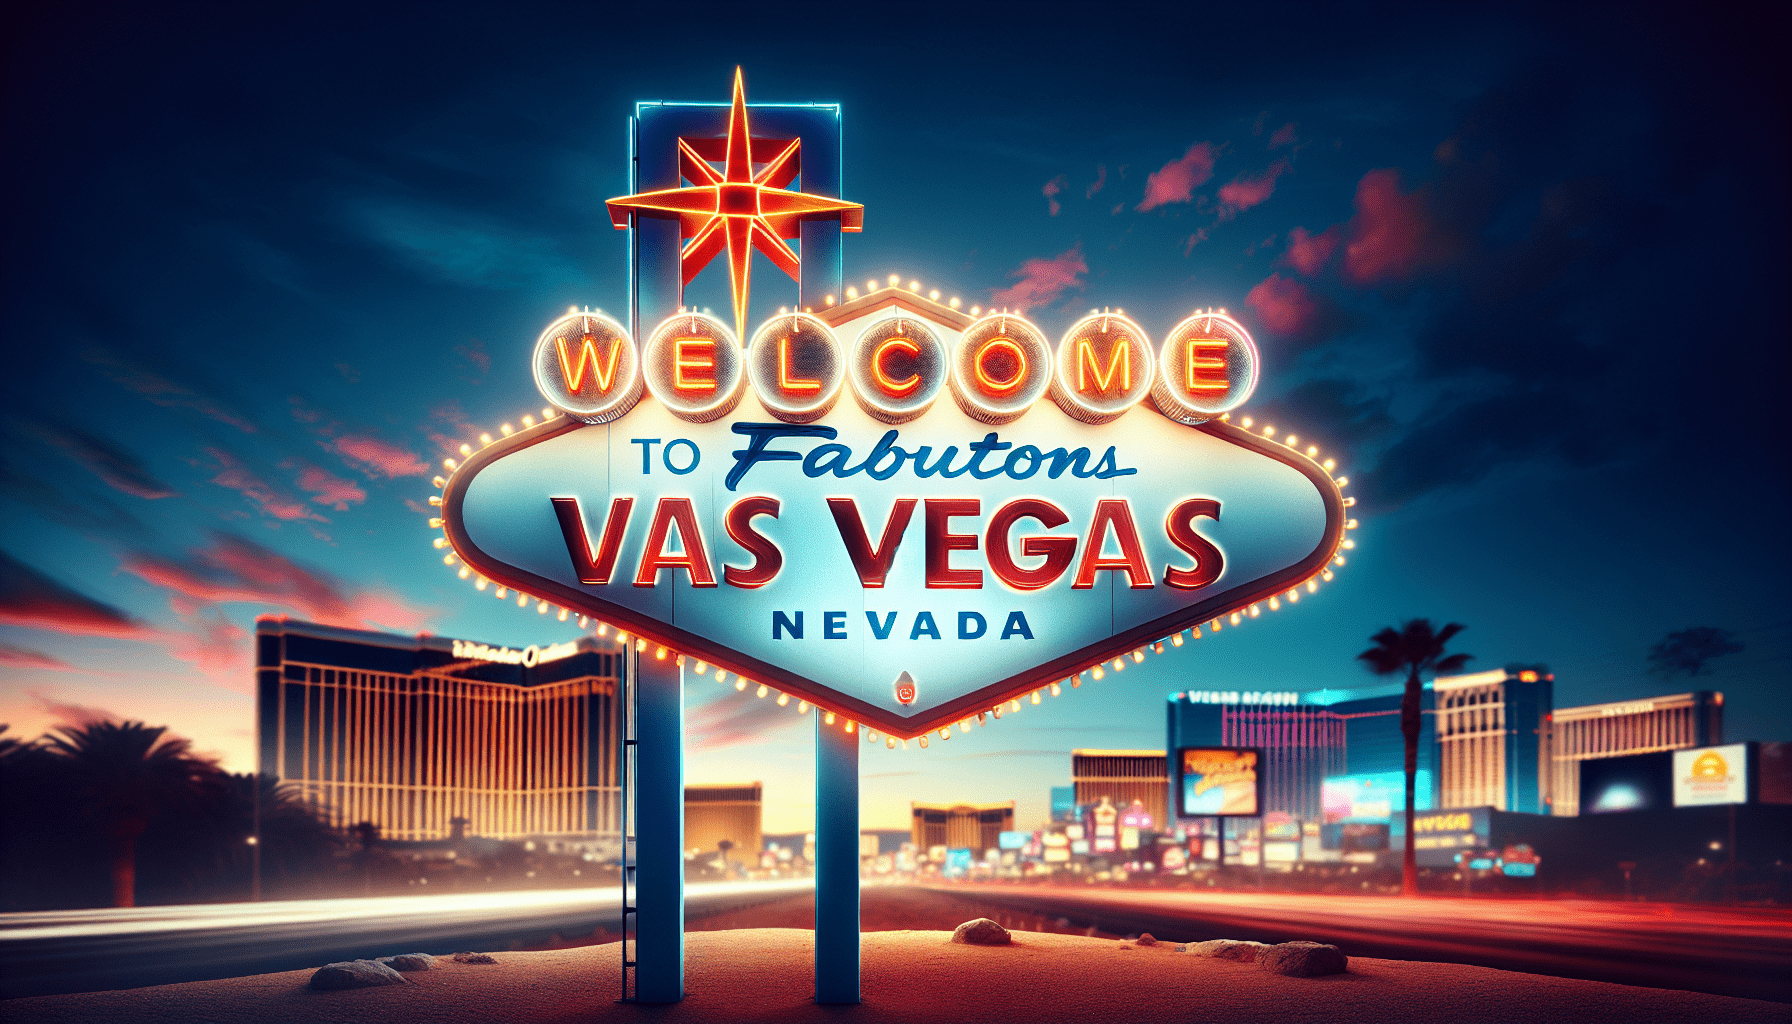 What Is The Best Month To Visit Vegas?